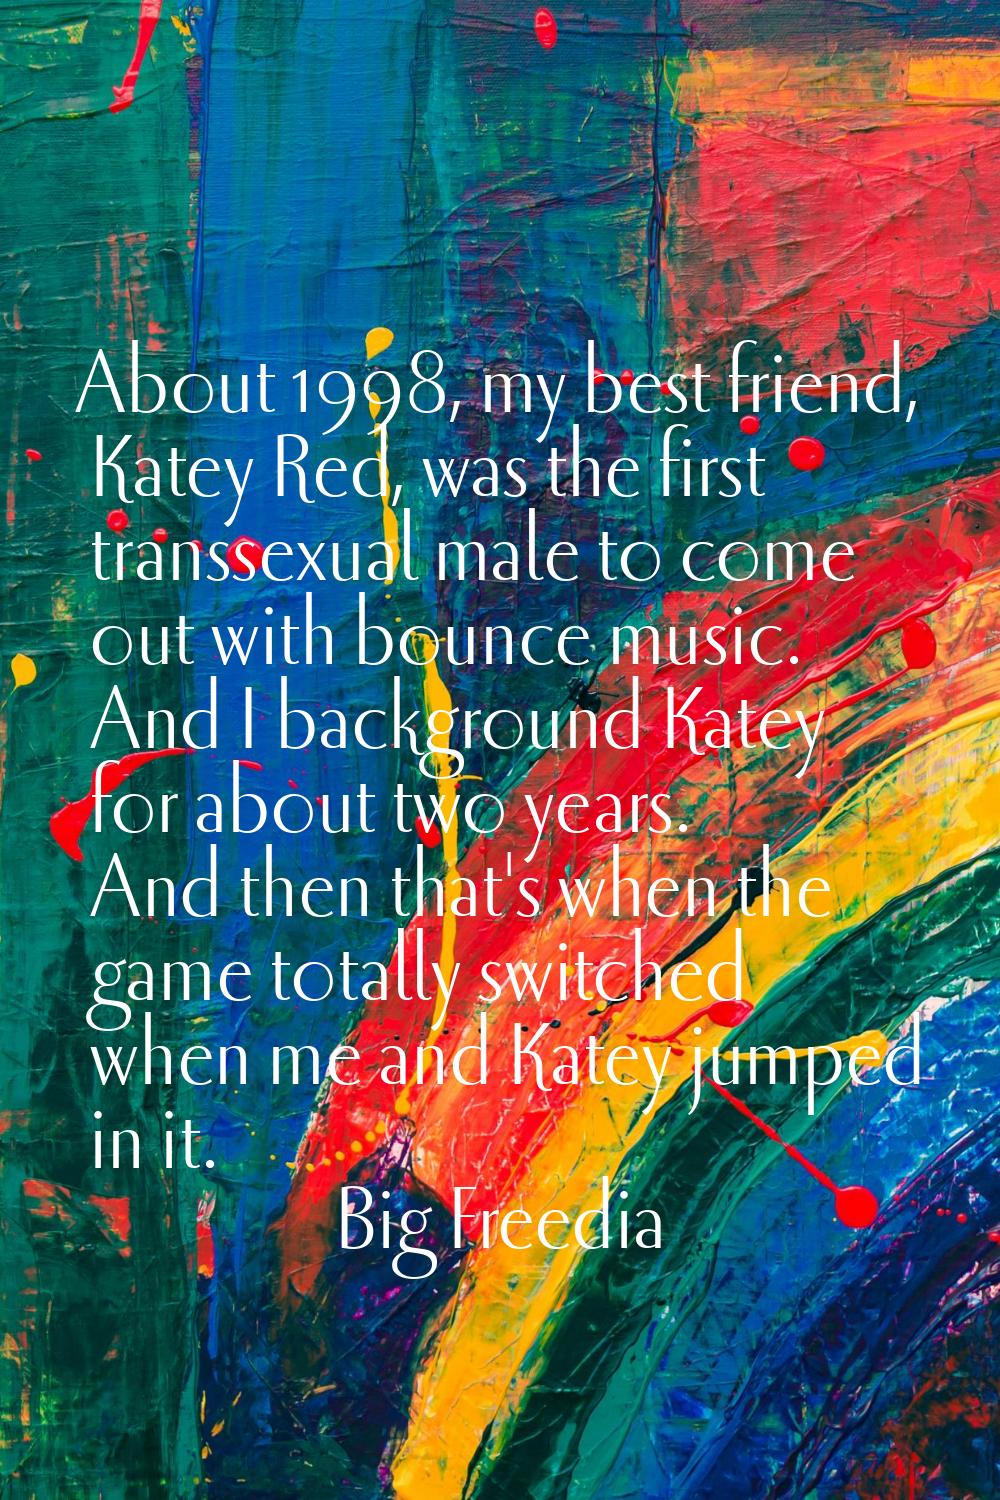 About 1998, my best friend, Katey Red, was the first transsexual male to come out with bounce music